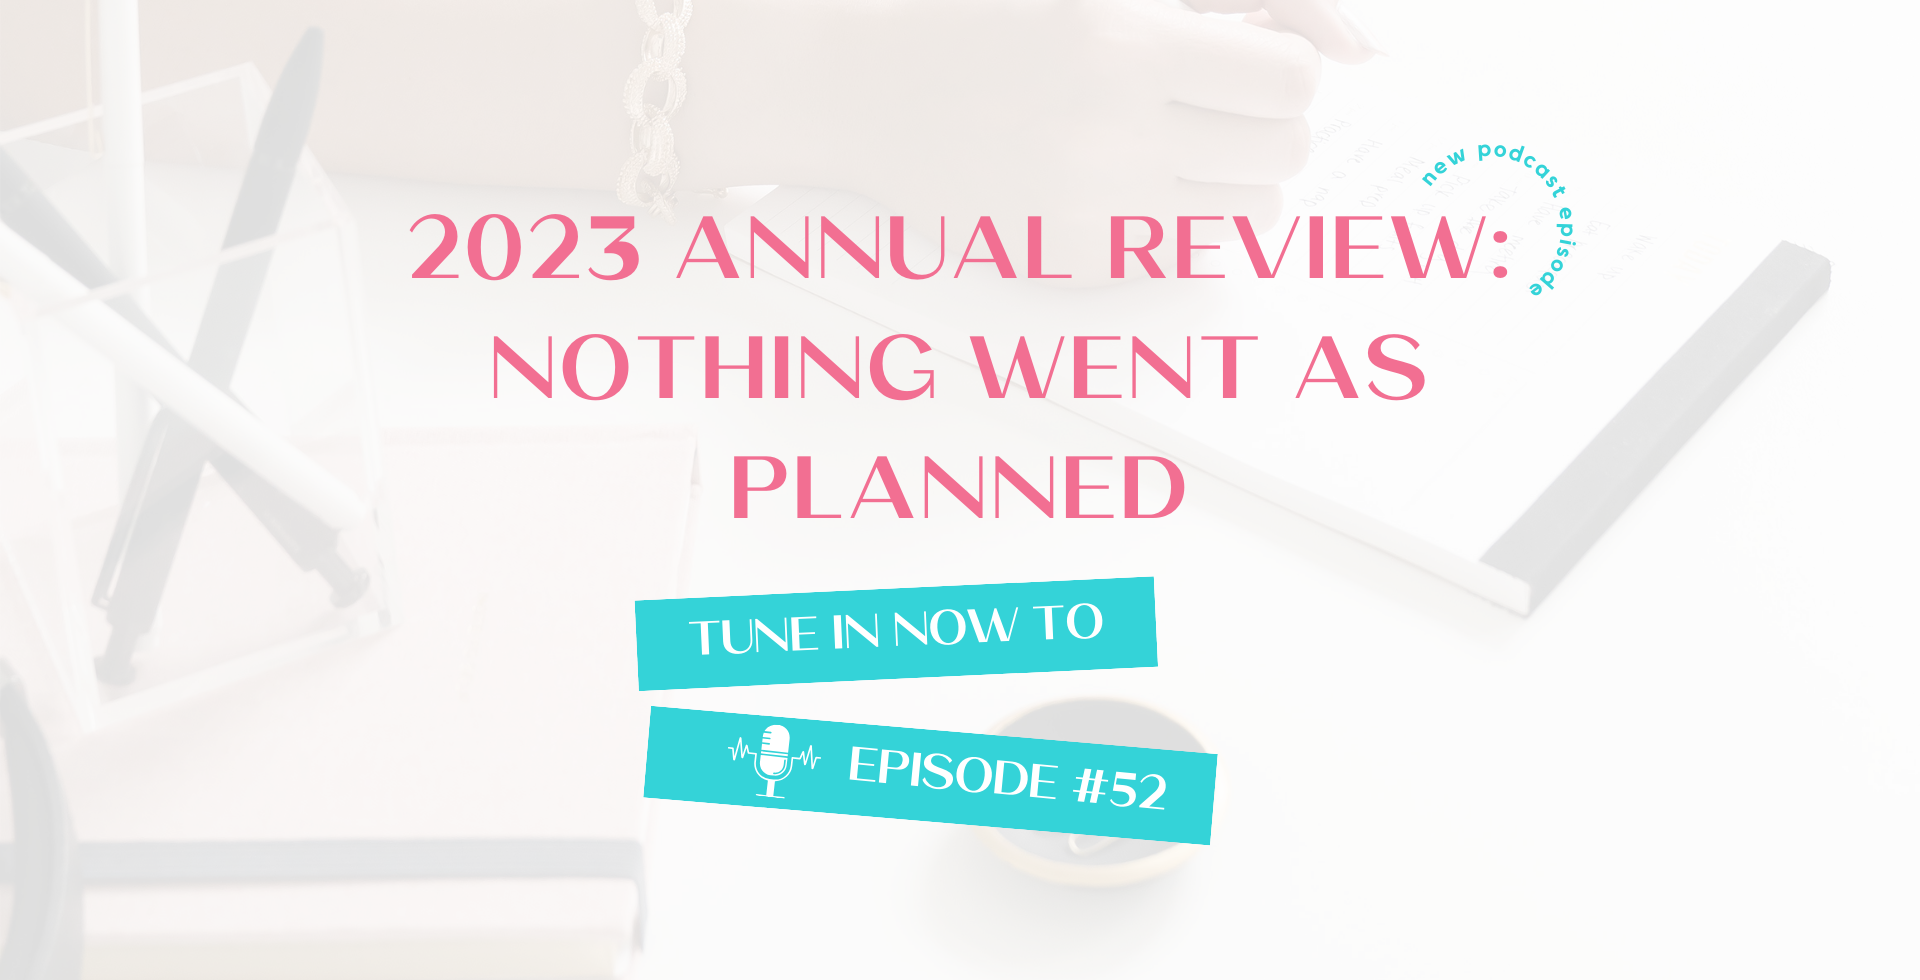 2023 Annual Review: Nothing Went as Planned - Episode 52